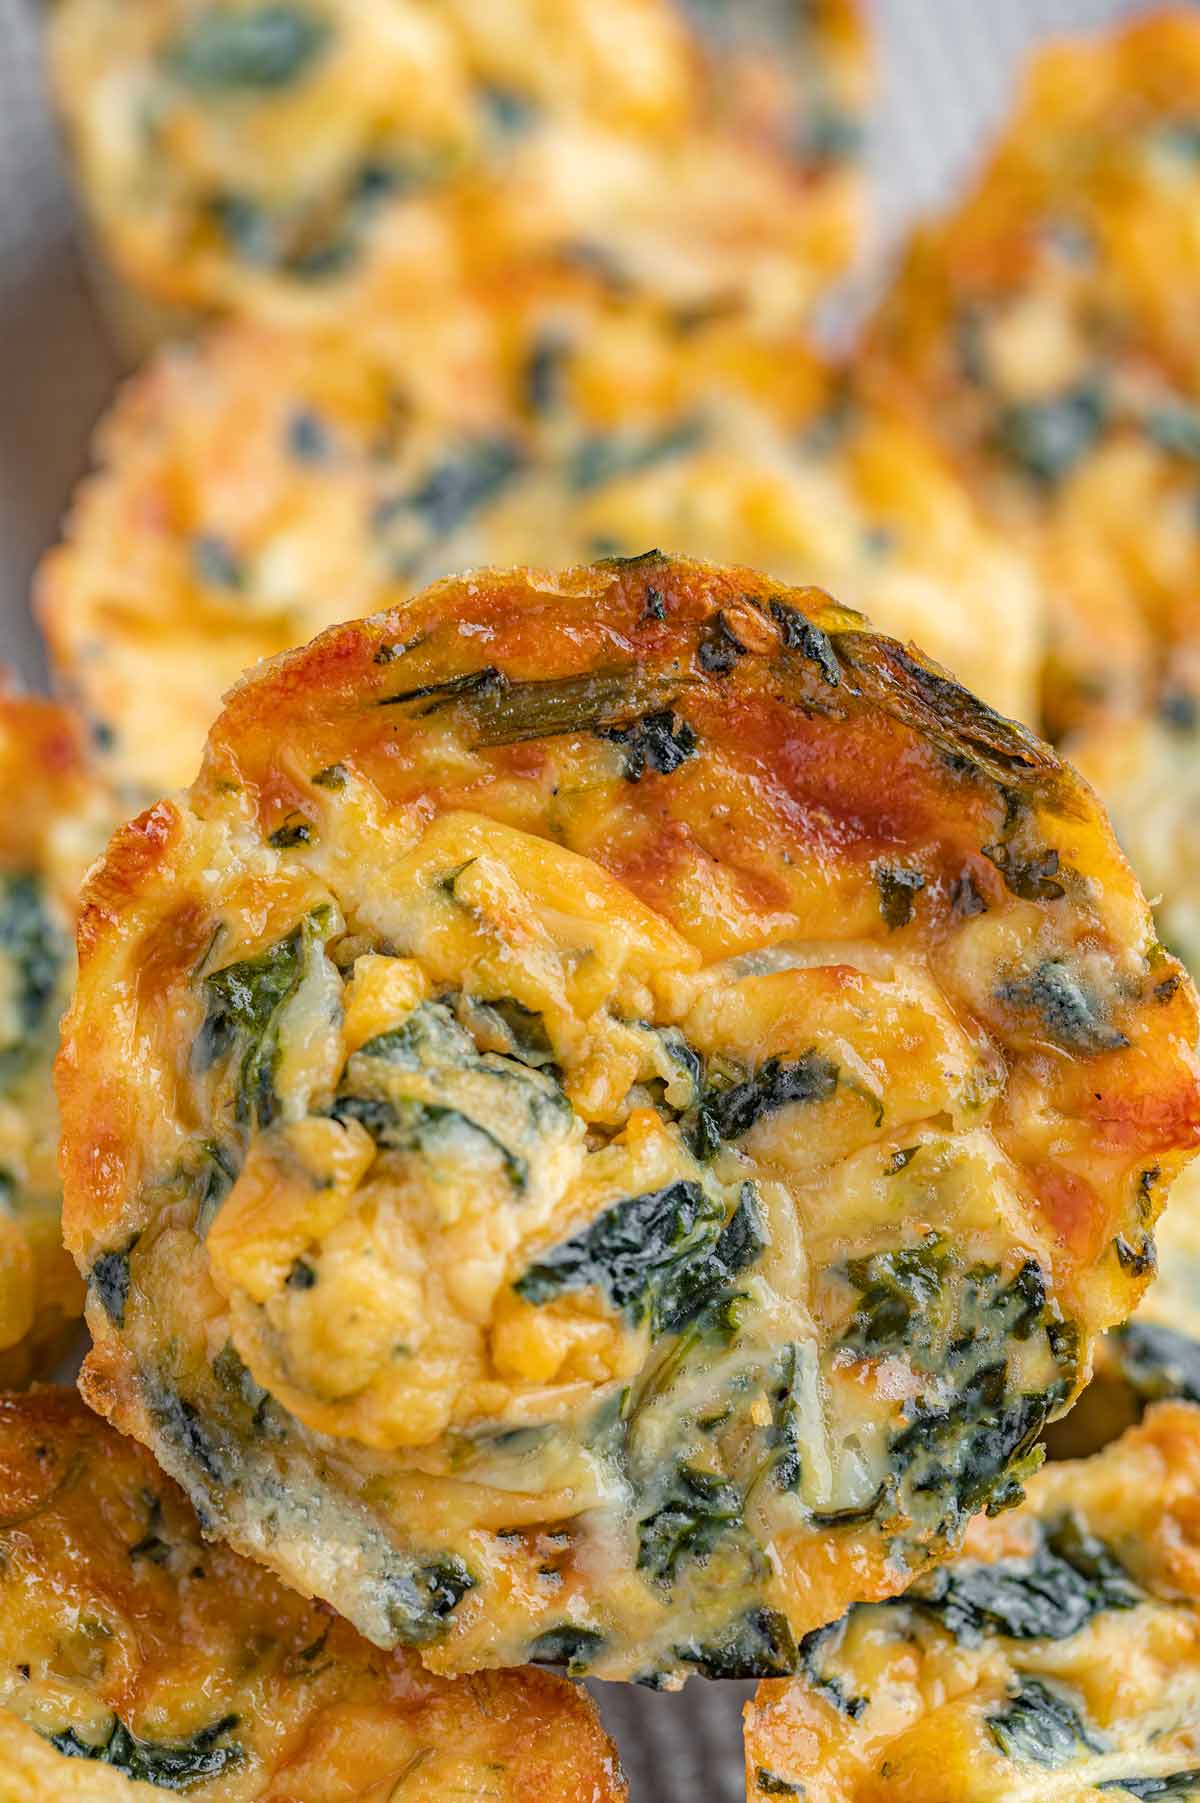 Mini Spinach Frittatas (With Parmesan Cheese) - Cooking Made Healthy